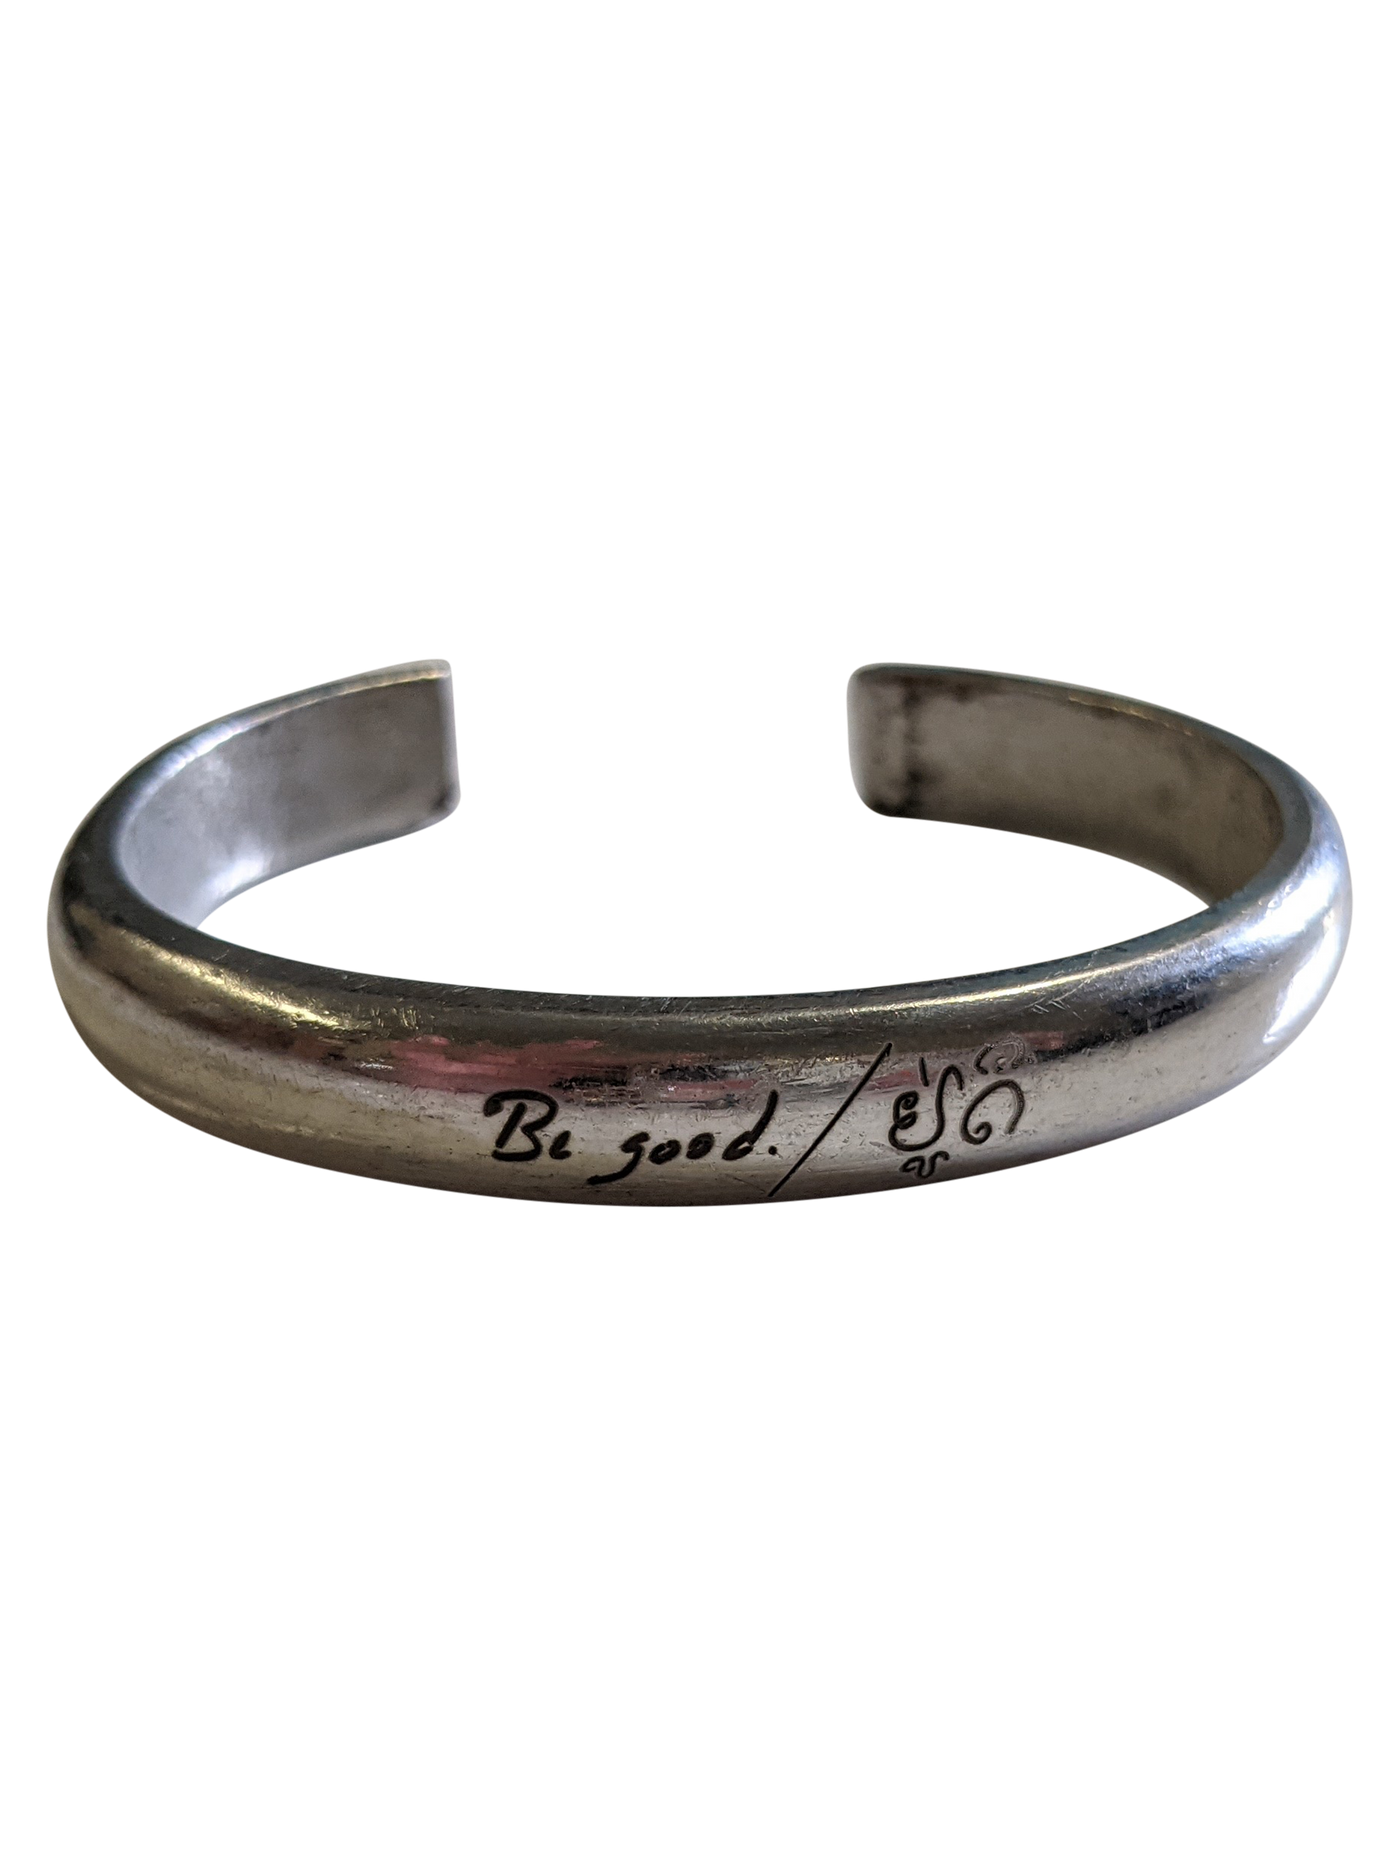 Article 22 + Be Good Dome Cuff Bracelet